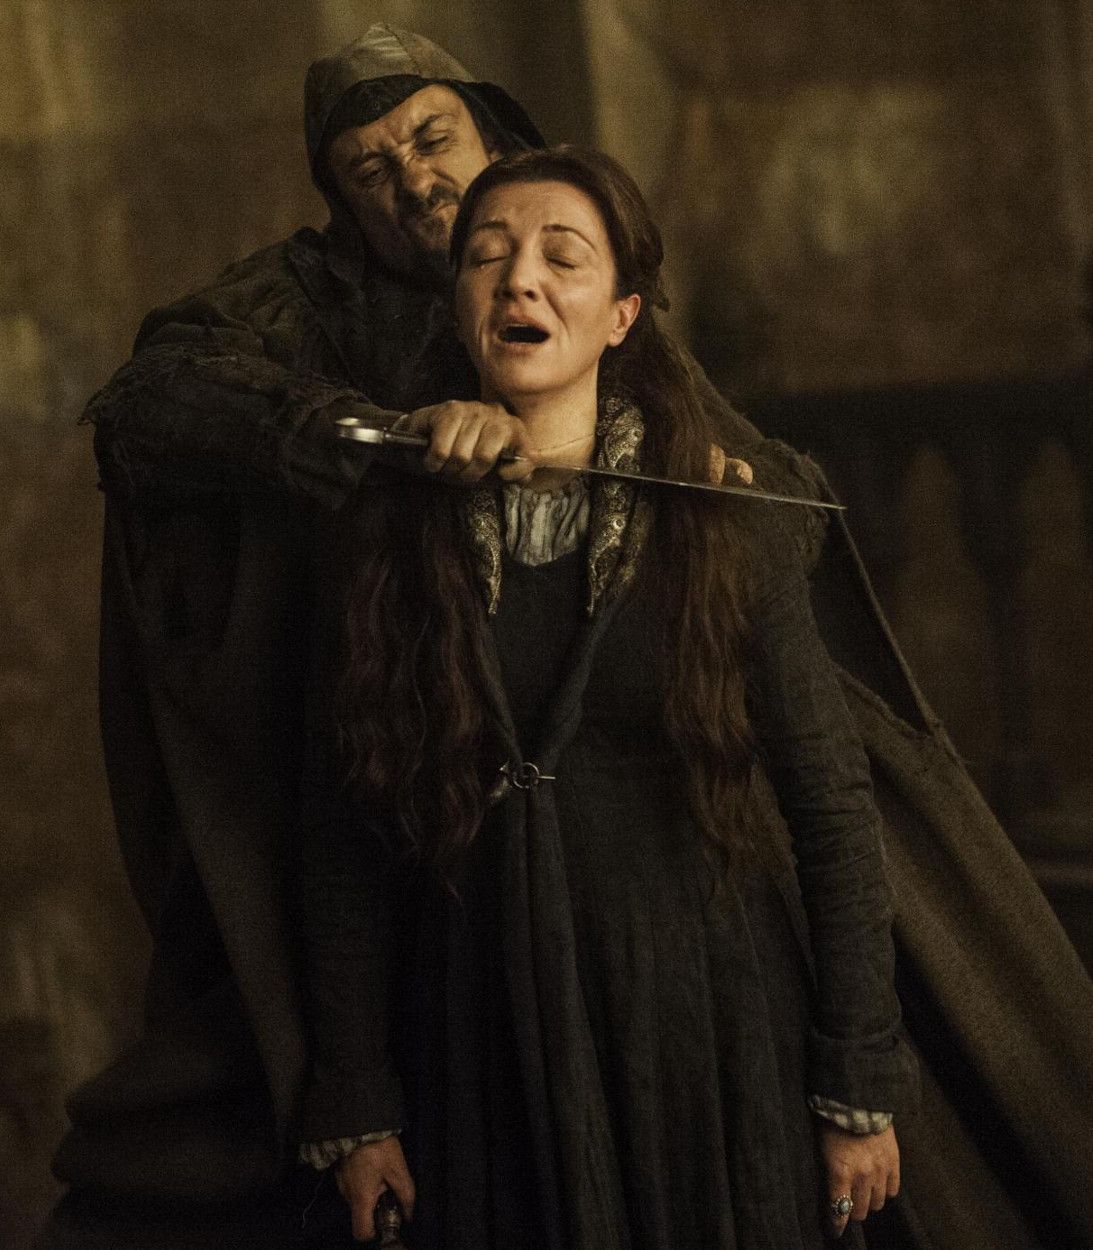 Michelle Fairley As Catelyn Stark At The Red Wedding On Game of Thrones